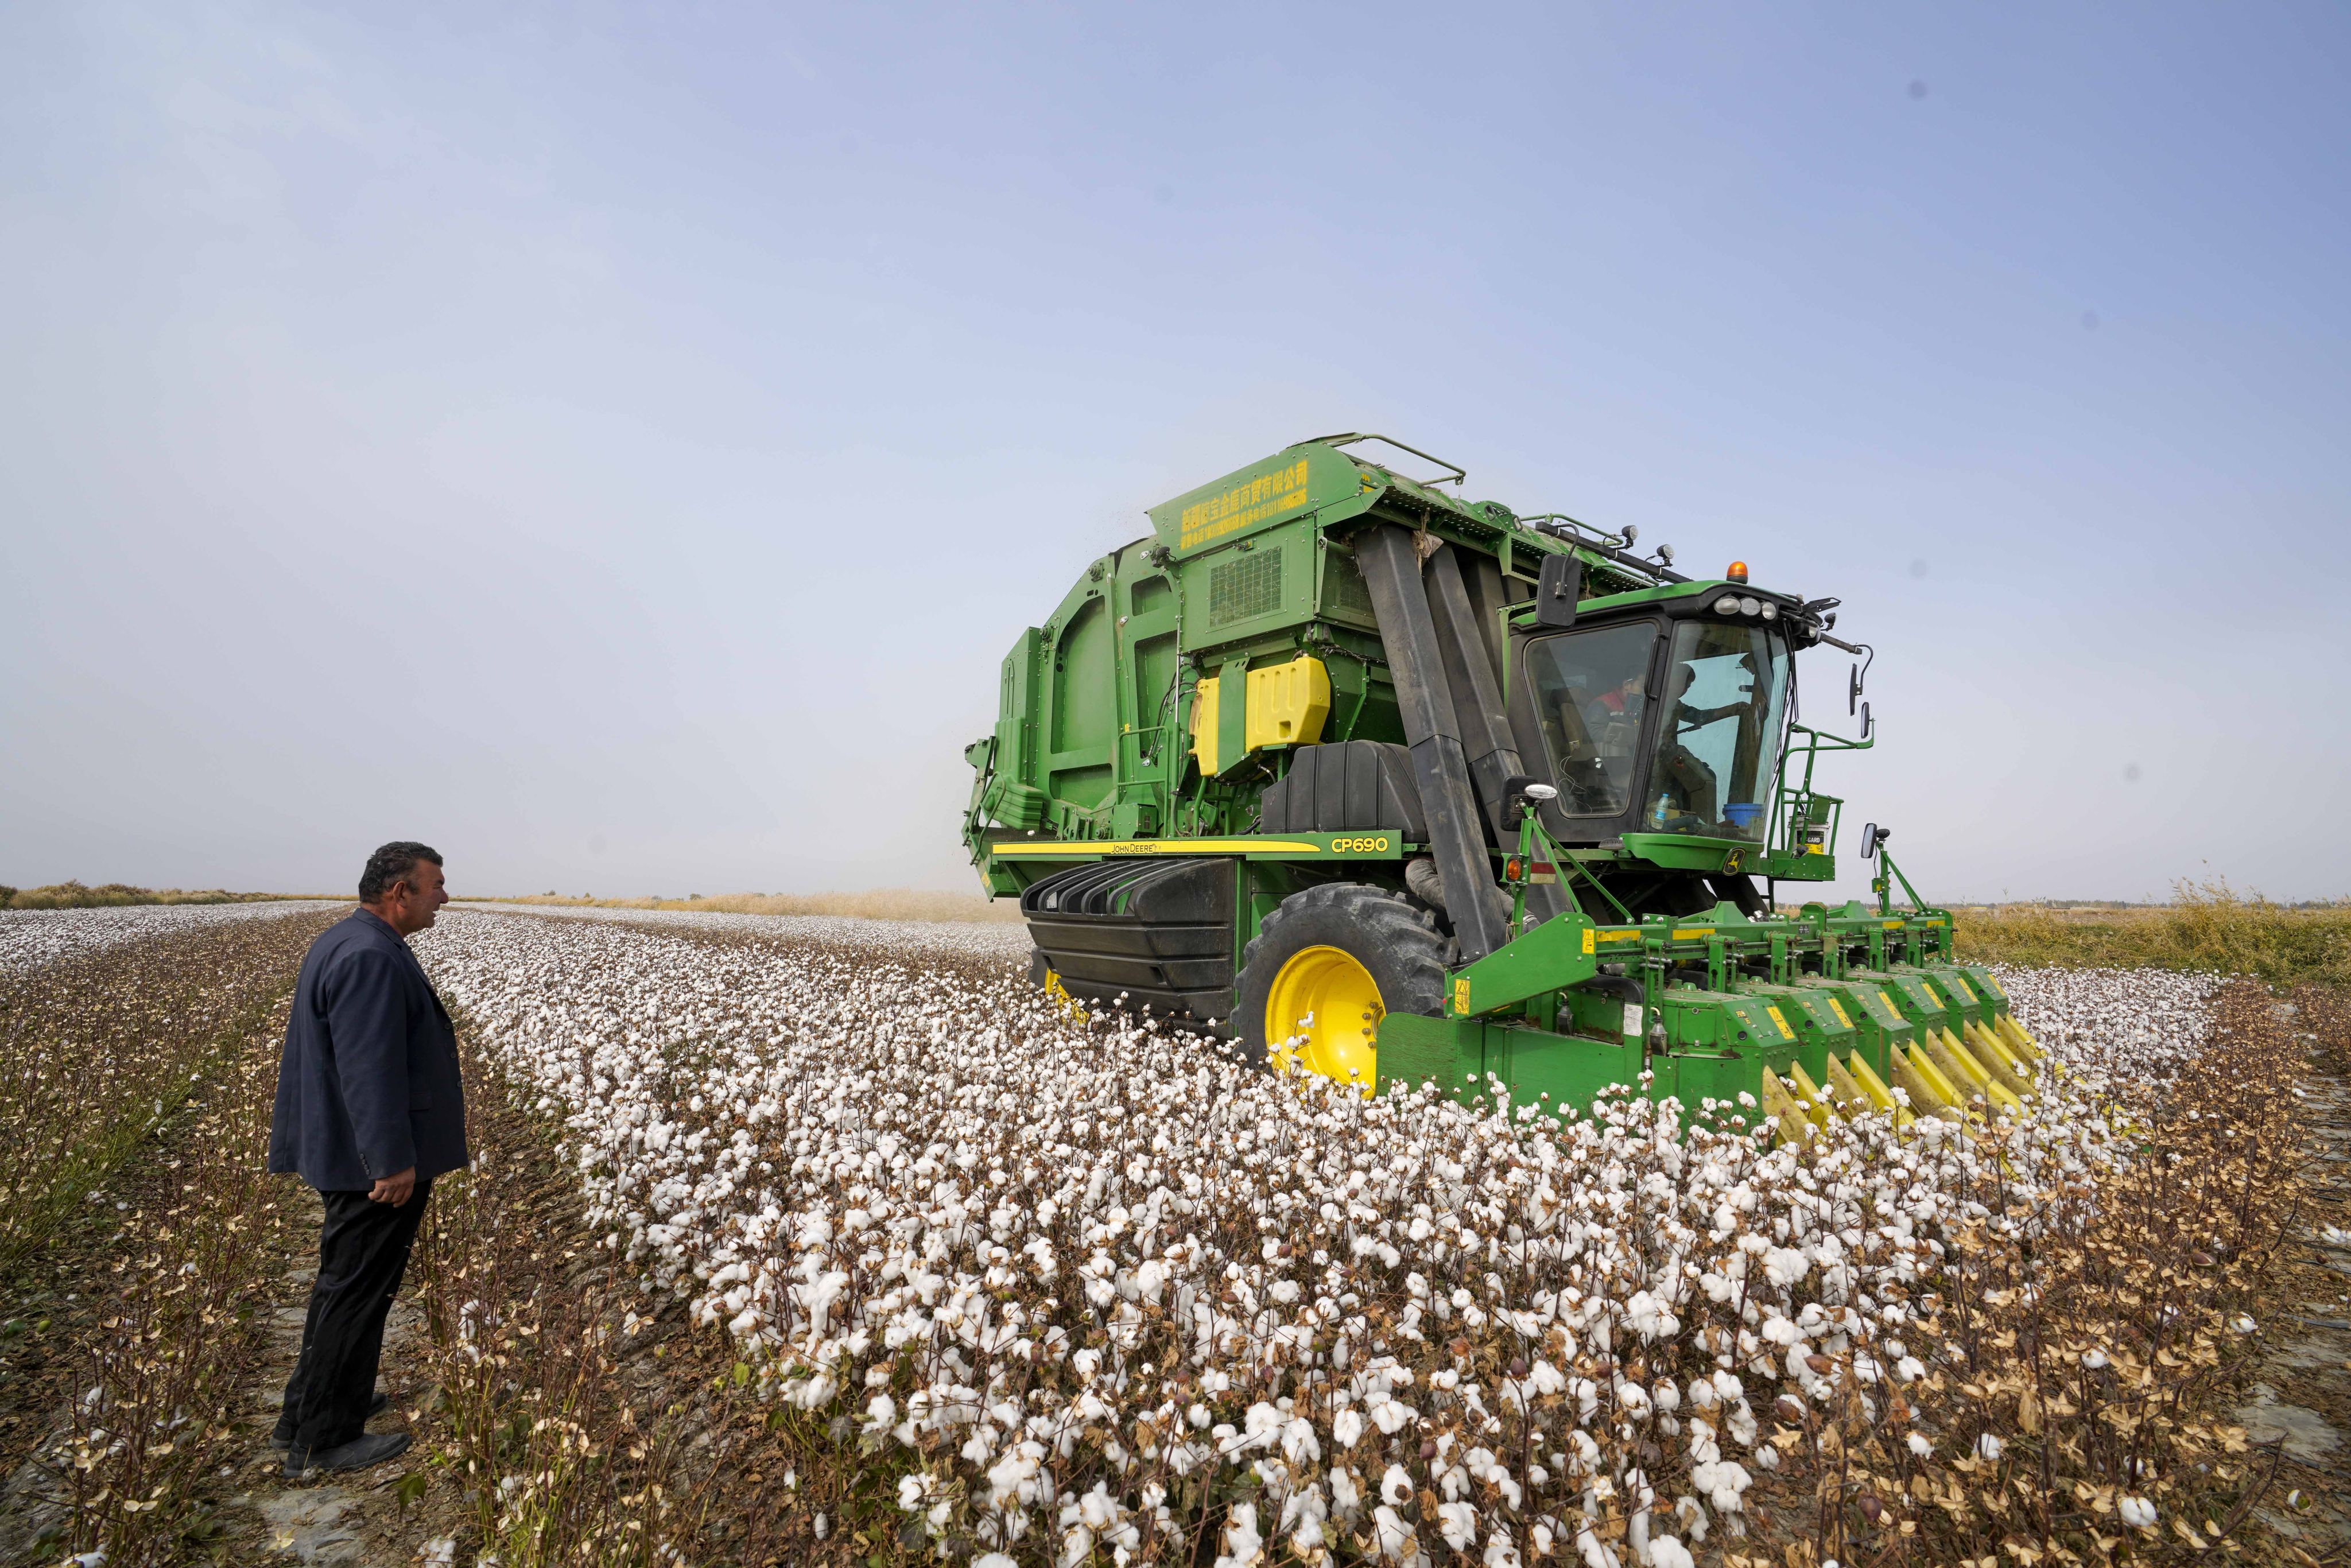 A cotton picker working in Yuli county in Xinjiang Uygur autonomous region. The US government considers cotton products from the Chinese region to be high-risk for forced labour. Photo: Xinhua